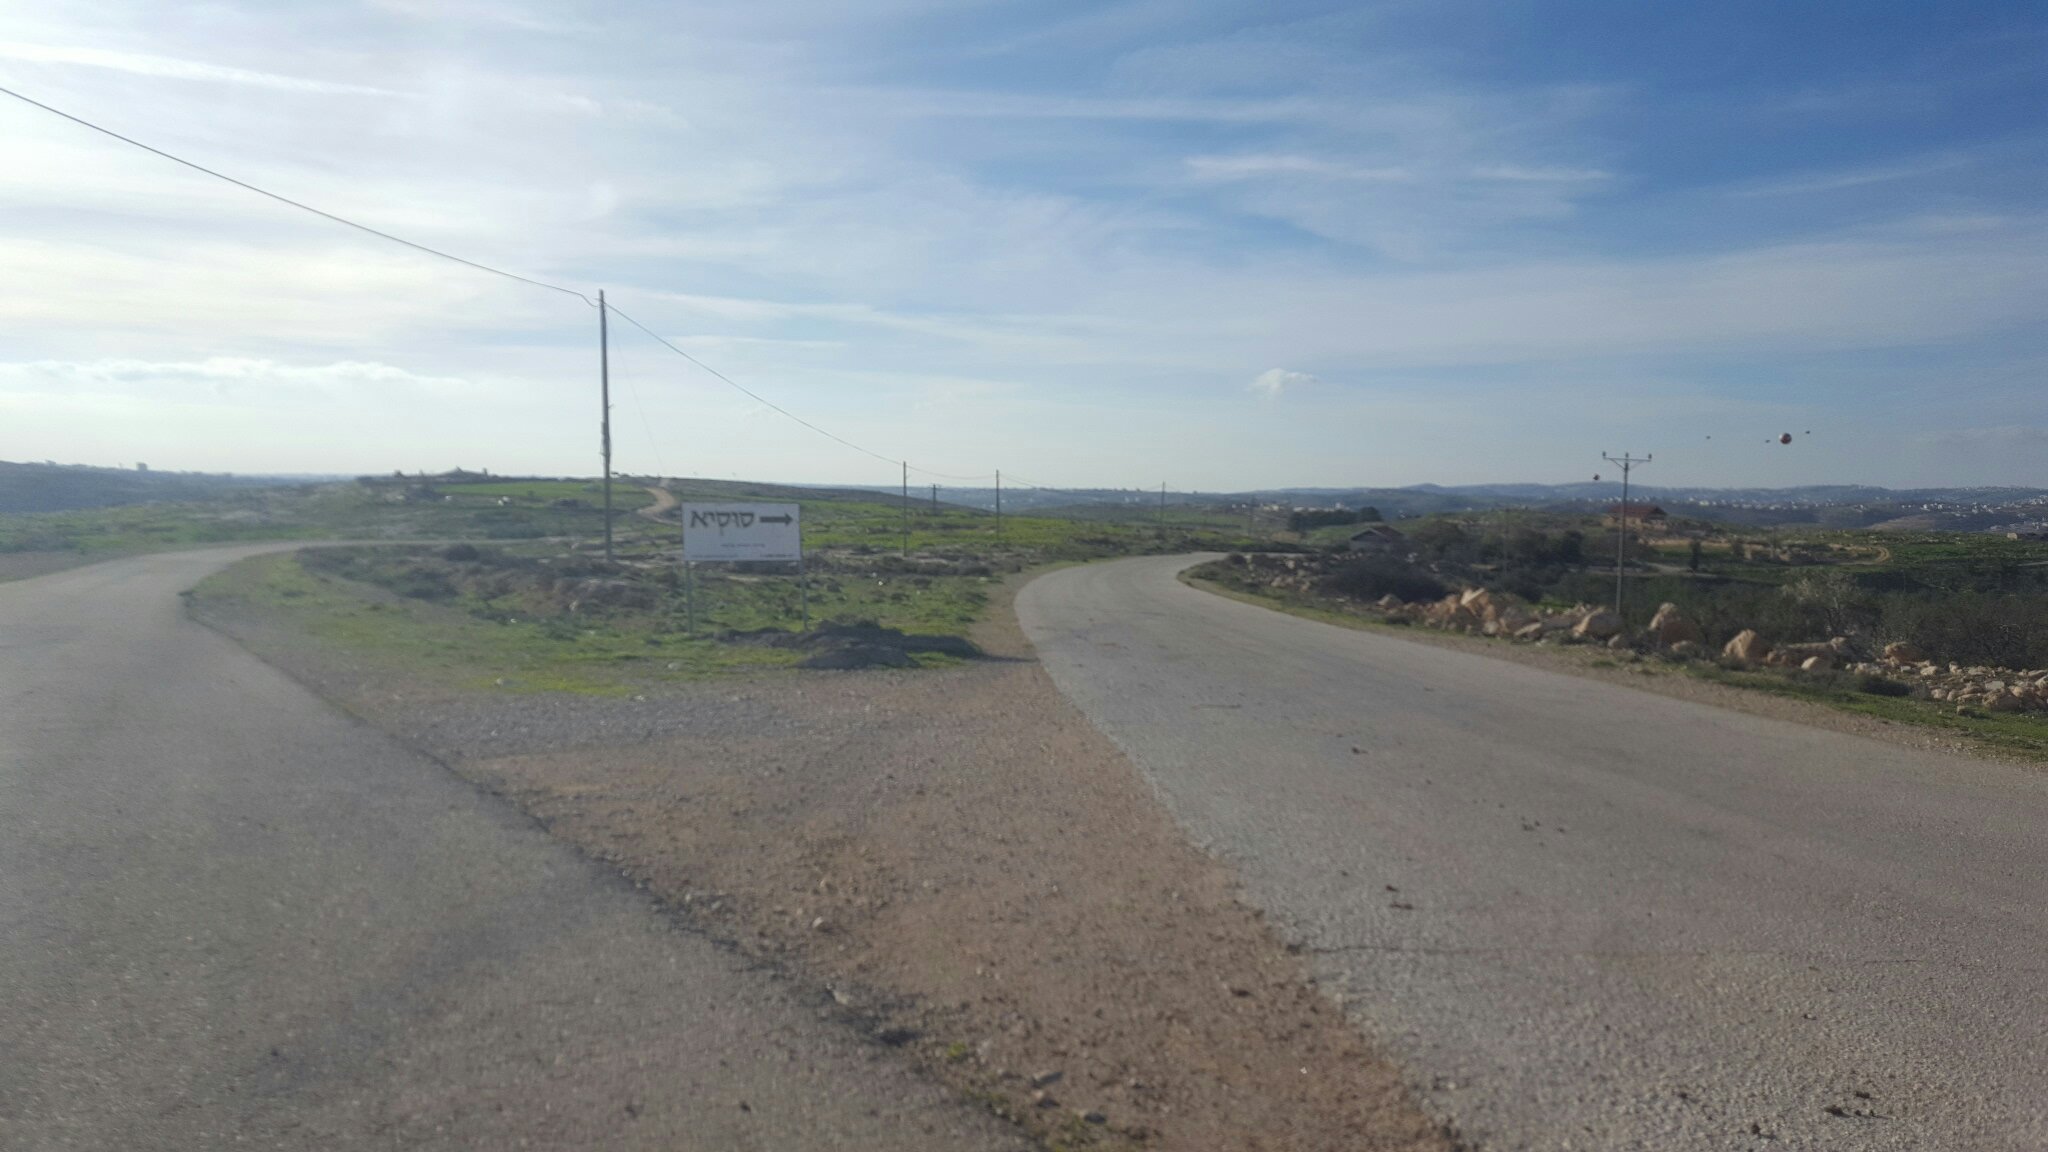 The road leads to Susya